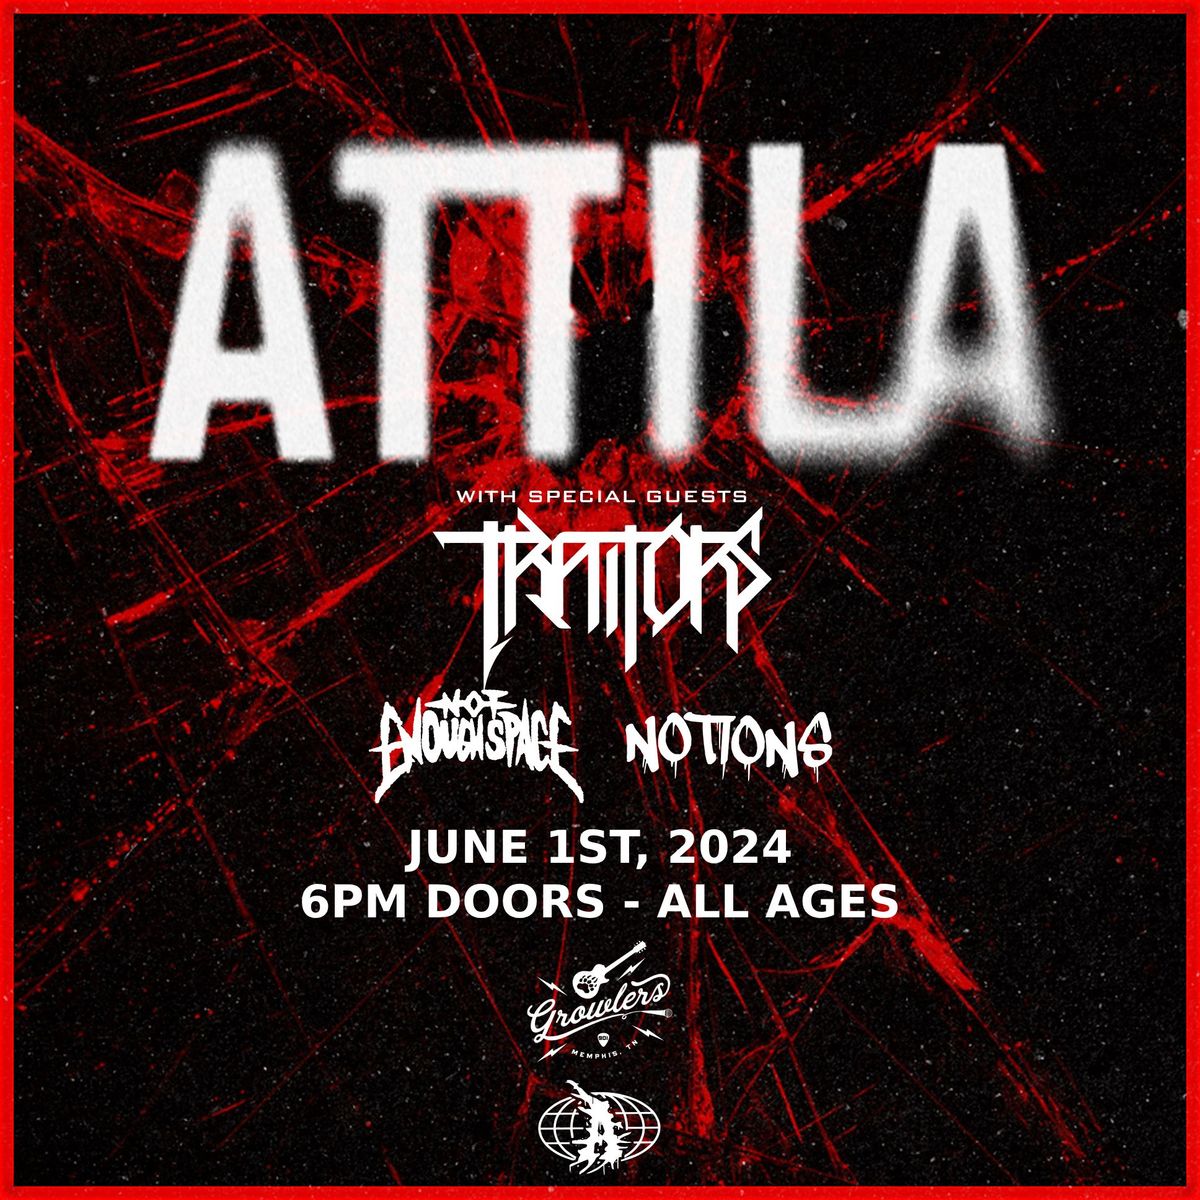 ATTILA w\/ Traitors and Not Enough Space, Notions at Growlers